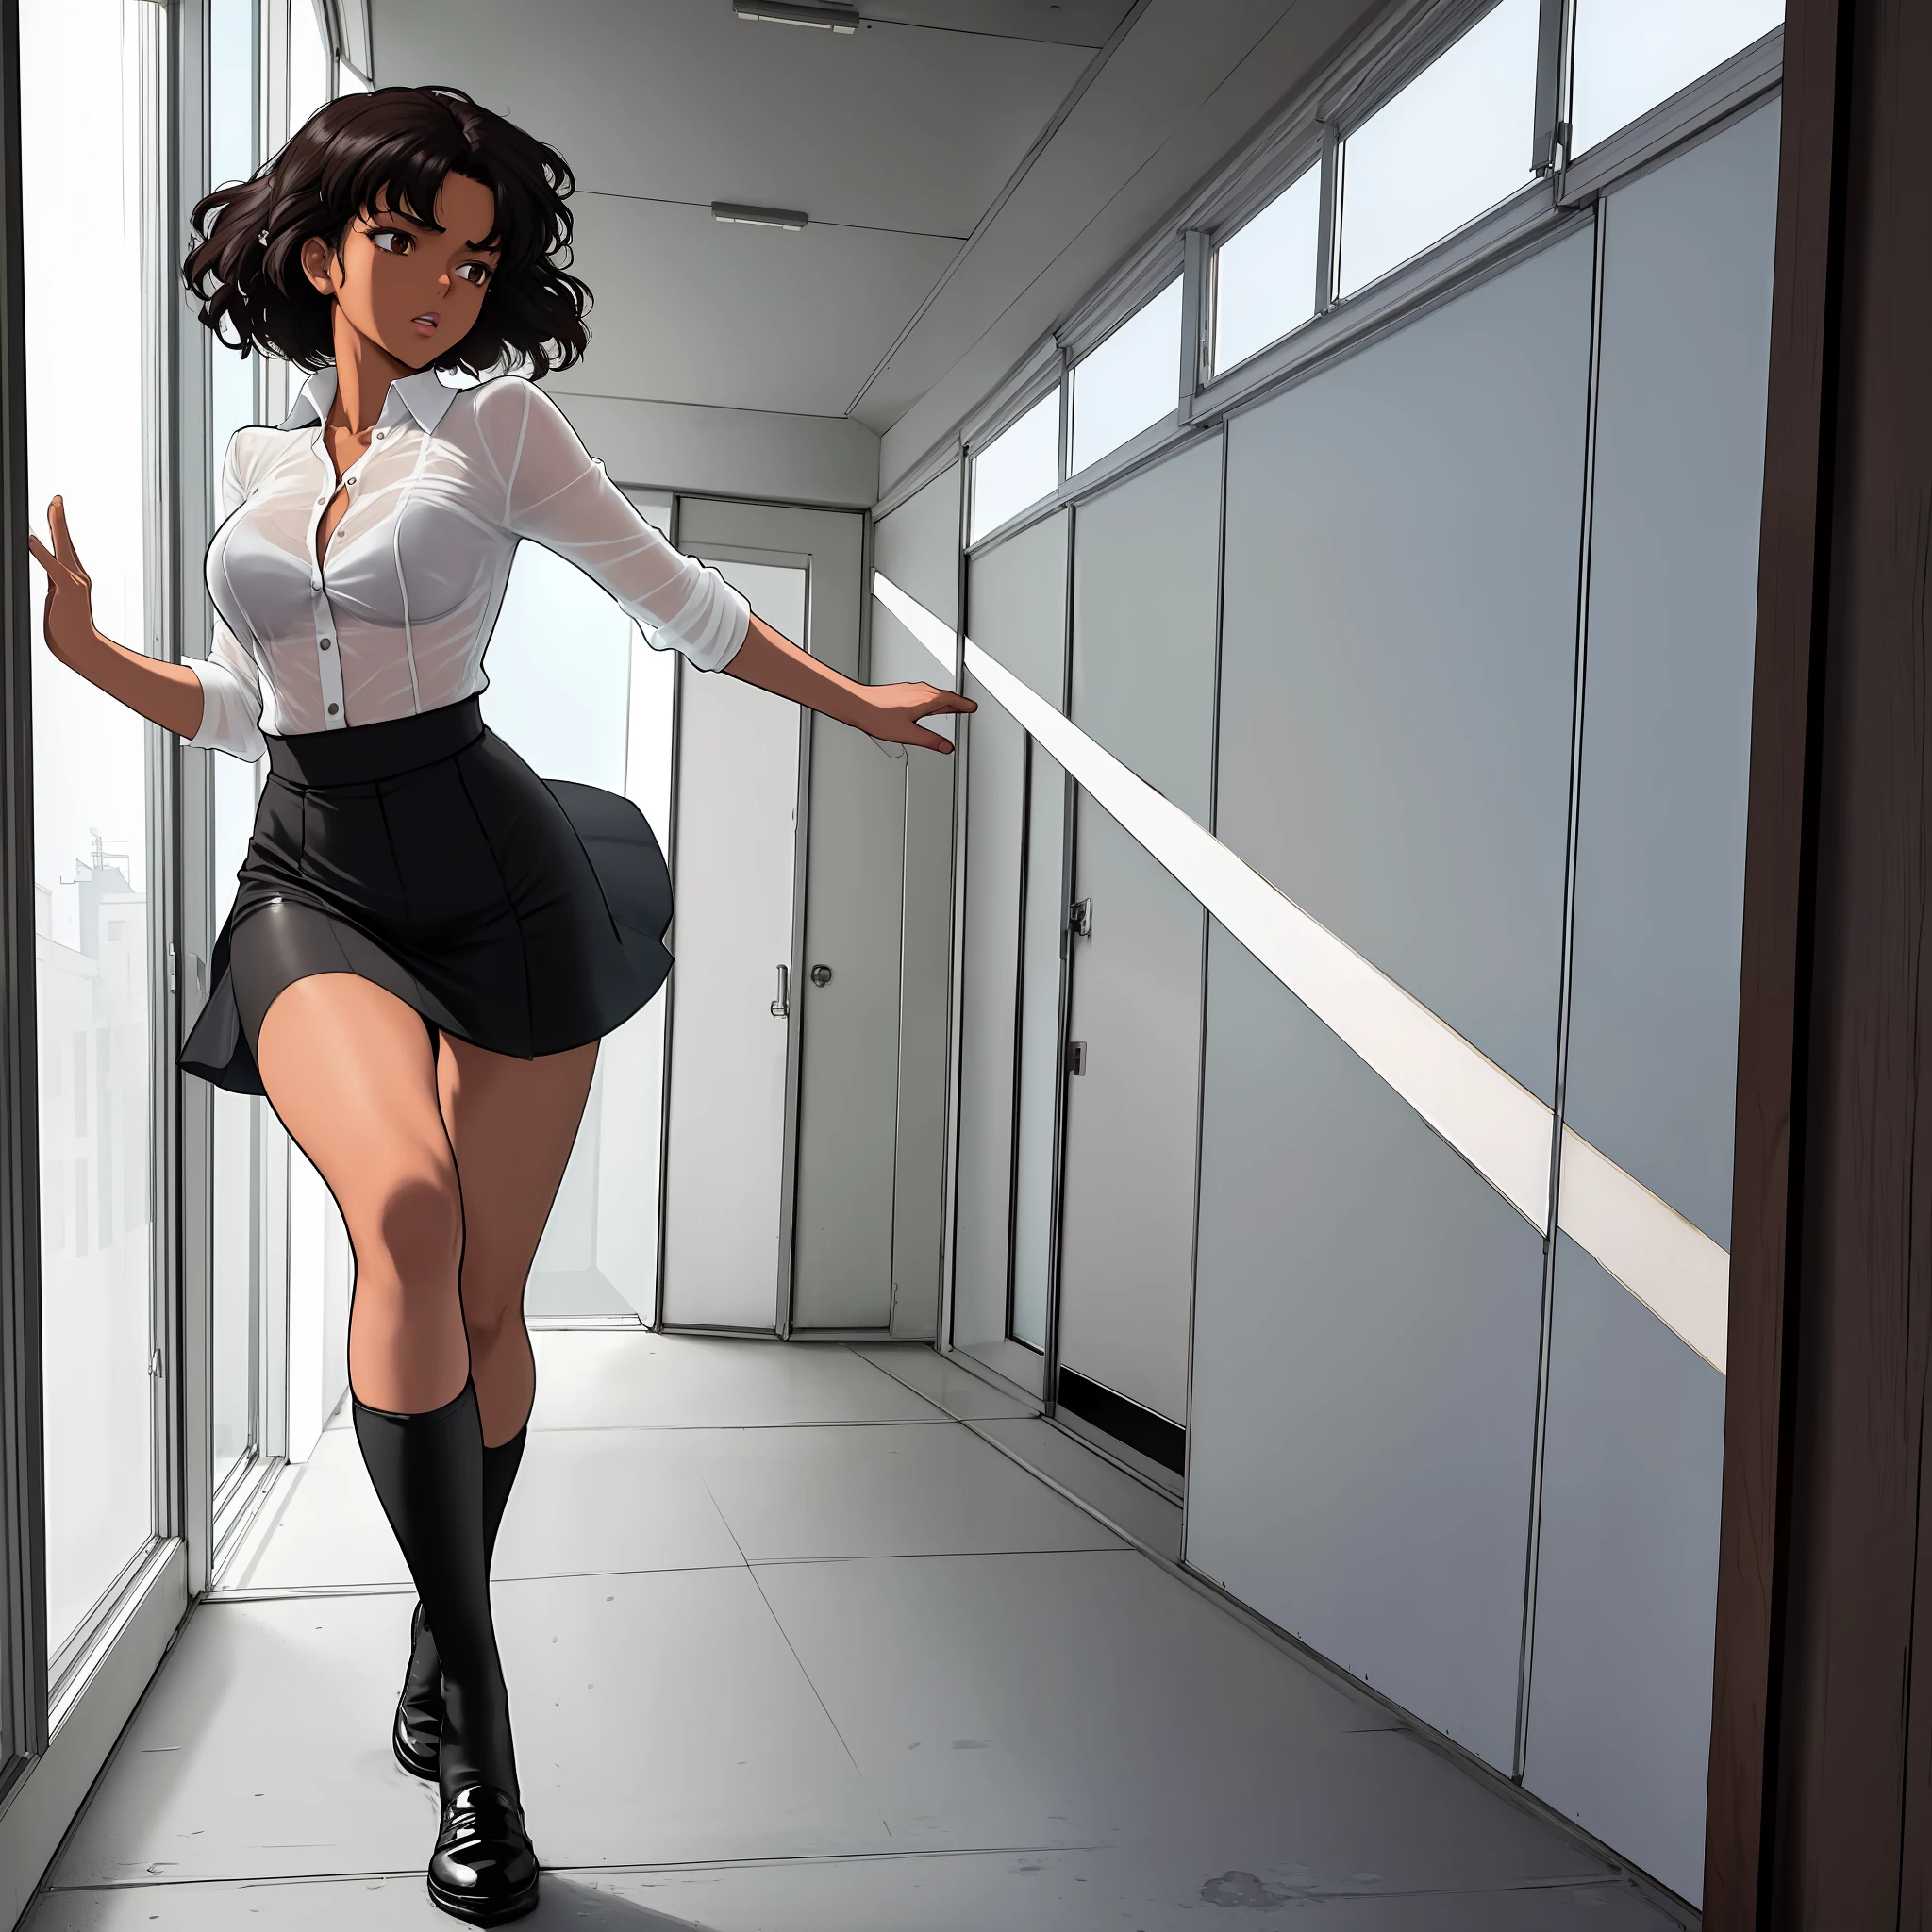 a afroHero (masterpiece, best quality), Female brunette, woman character, (((running to look at the bedroom window with worry))), (comic style artwork with perfect anatomy), perfect body, transparent wet ultrathin white dress shirt unbuttoned, black knee high tights, (black short miniskirt), highly detailed--no outline